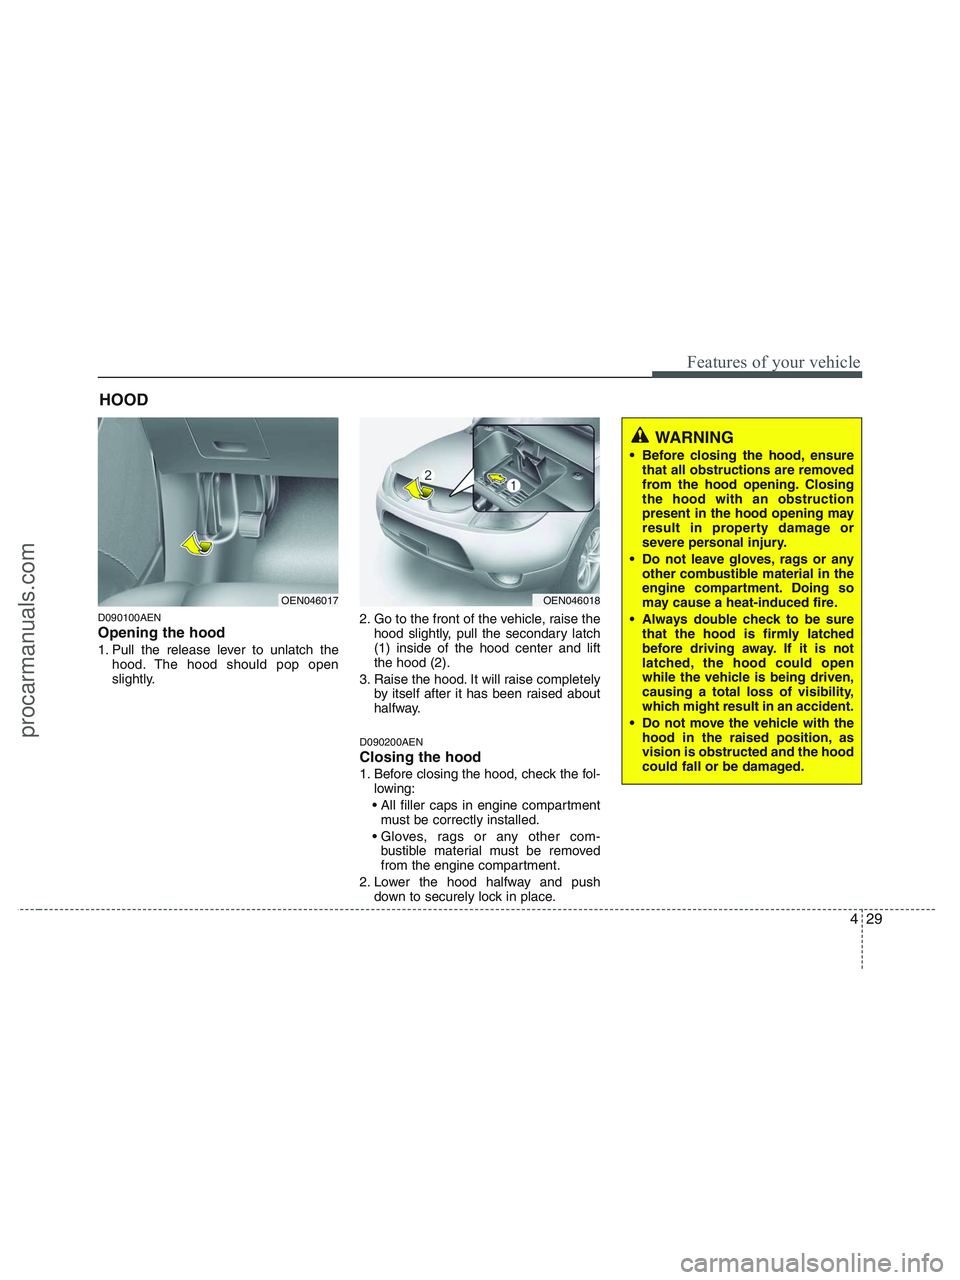 HYUNDAI VERACRUZ 2010  Owners Manual 429
Features of your vehicle
D090100AEN
Opening the hood 
1. Pull the release lever to unlatch the
hood. The hood should pop open
slightly.2. Go to the front of the vehicle, raise the
hood slightly, p